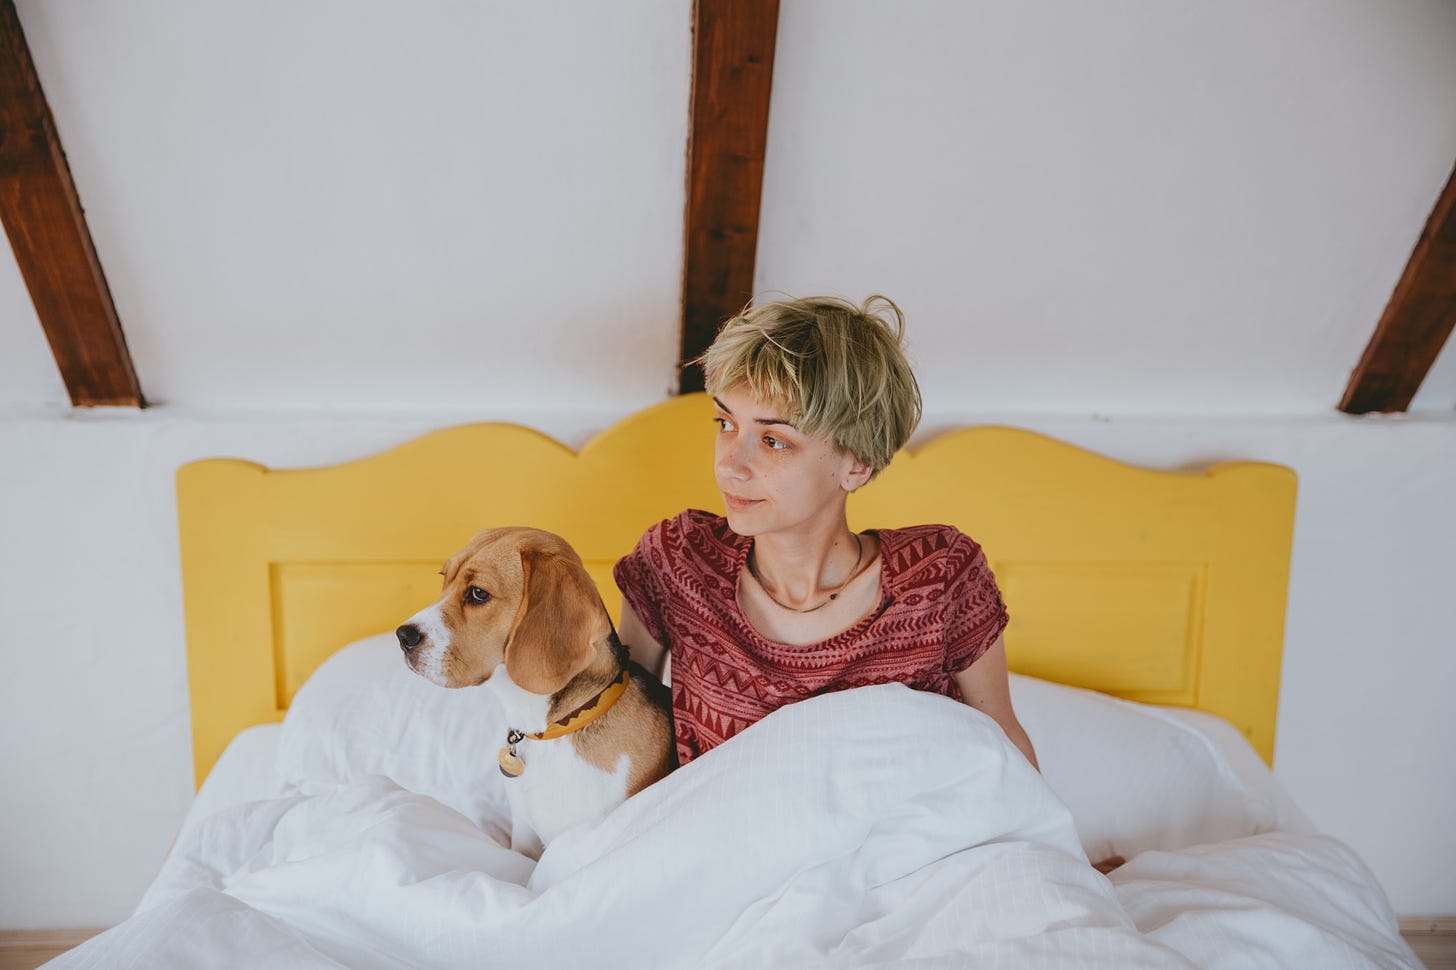 A person lays in bed with their dog.